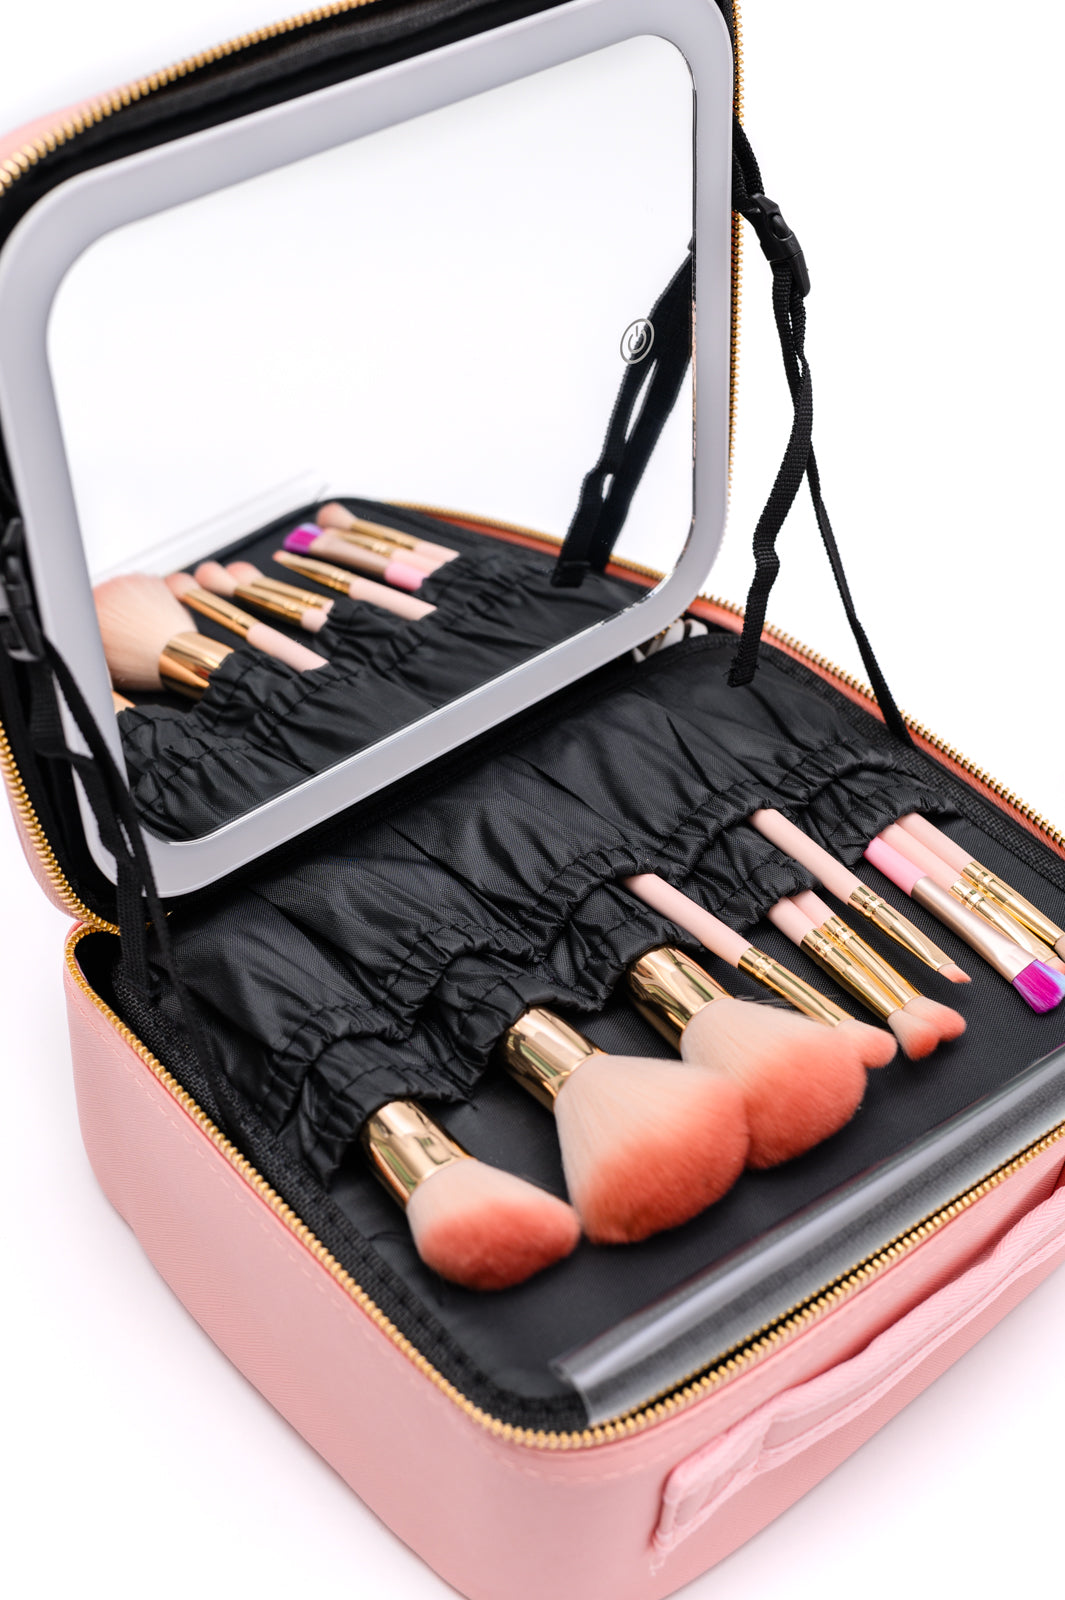 She's All That LED Makeup Case in Pink - Three Bears Boutique